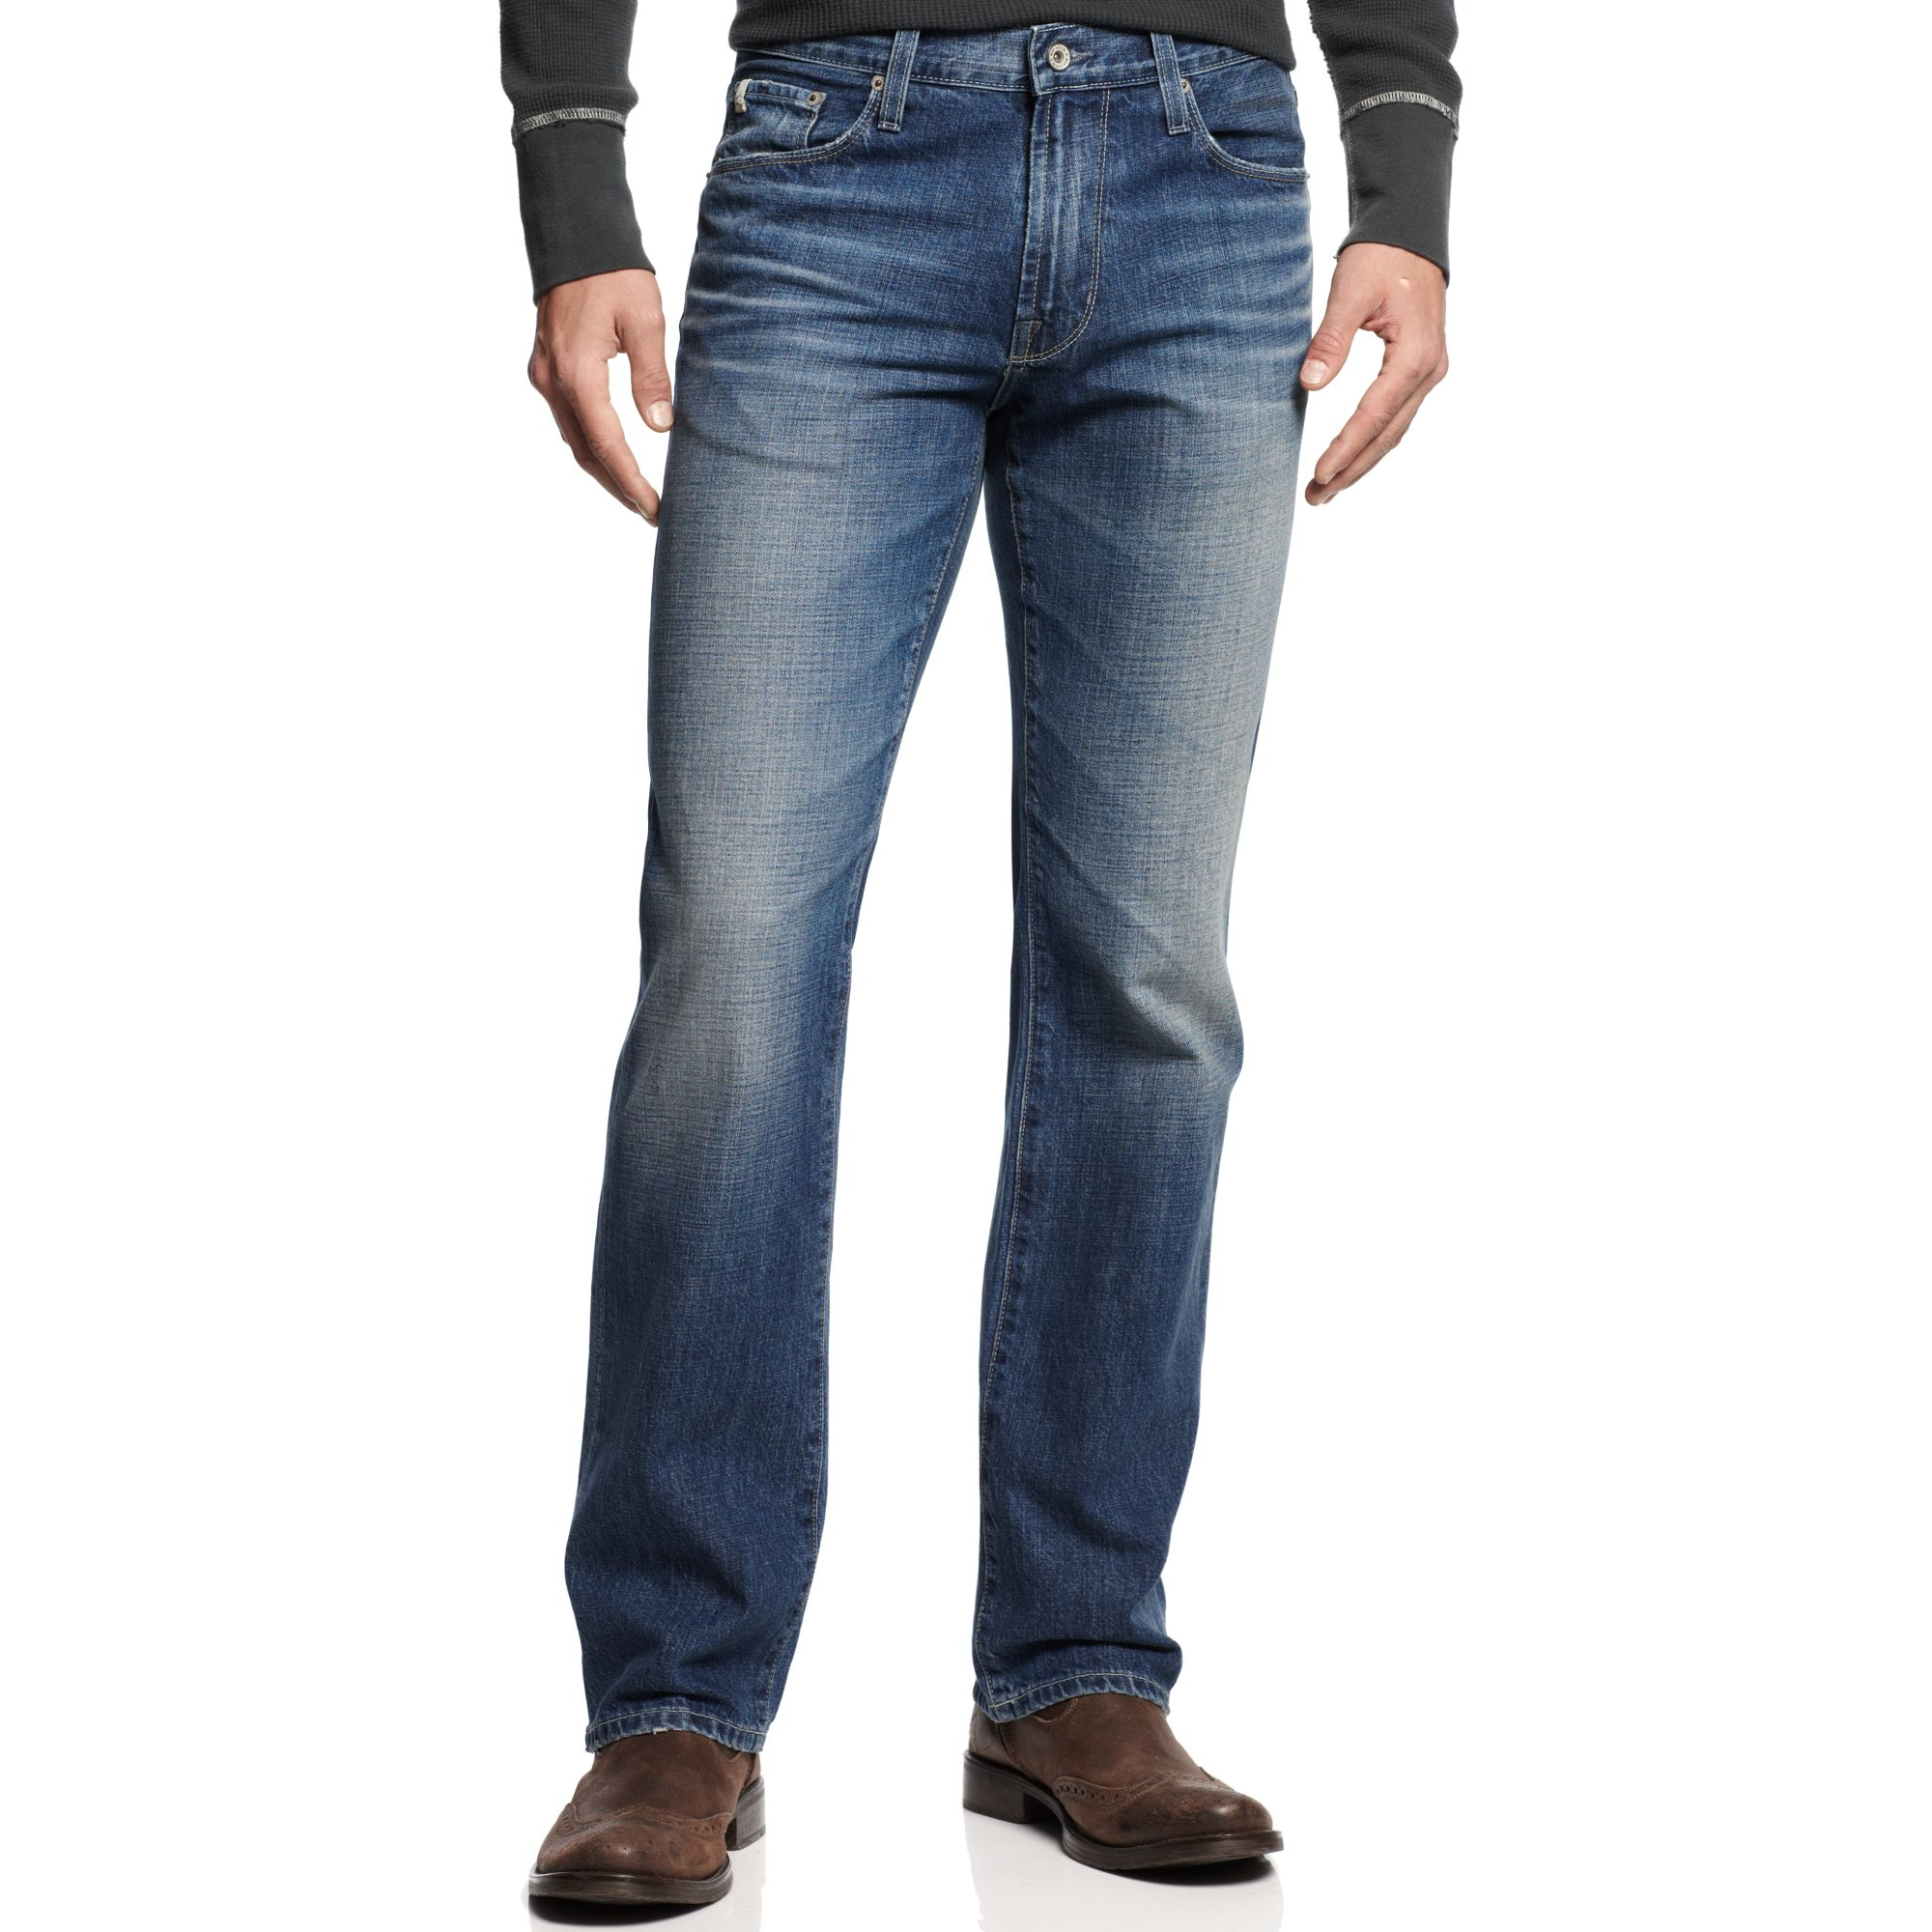 Lyst - Big Star Union Straight Leg Jeans in Blue for Men